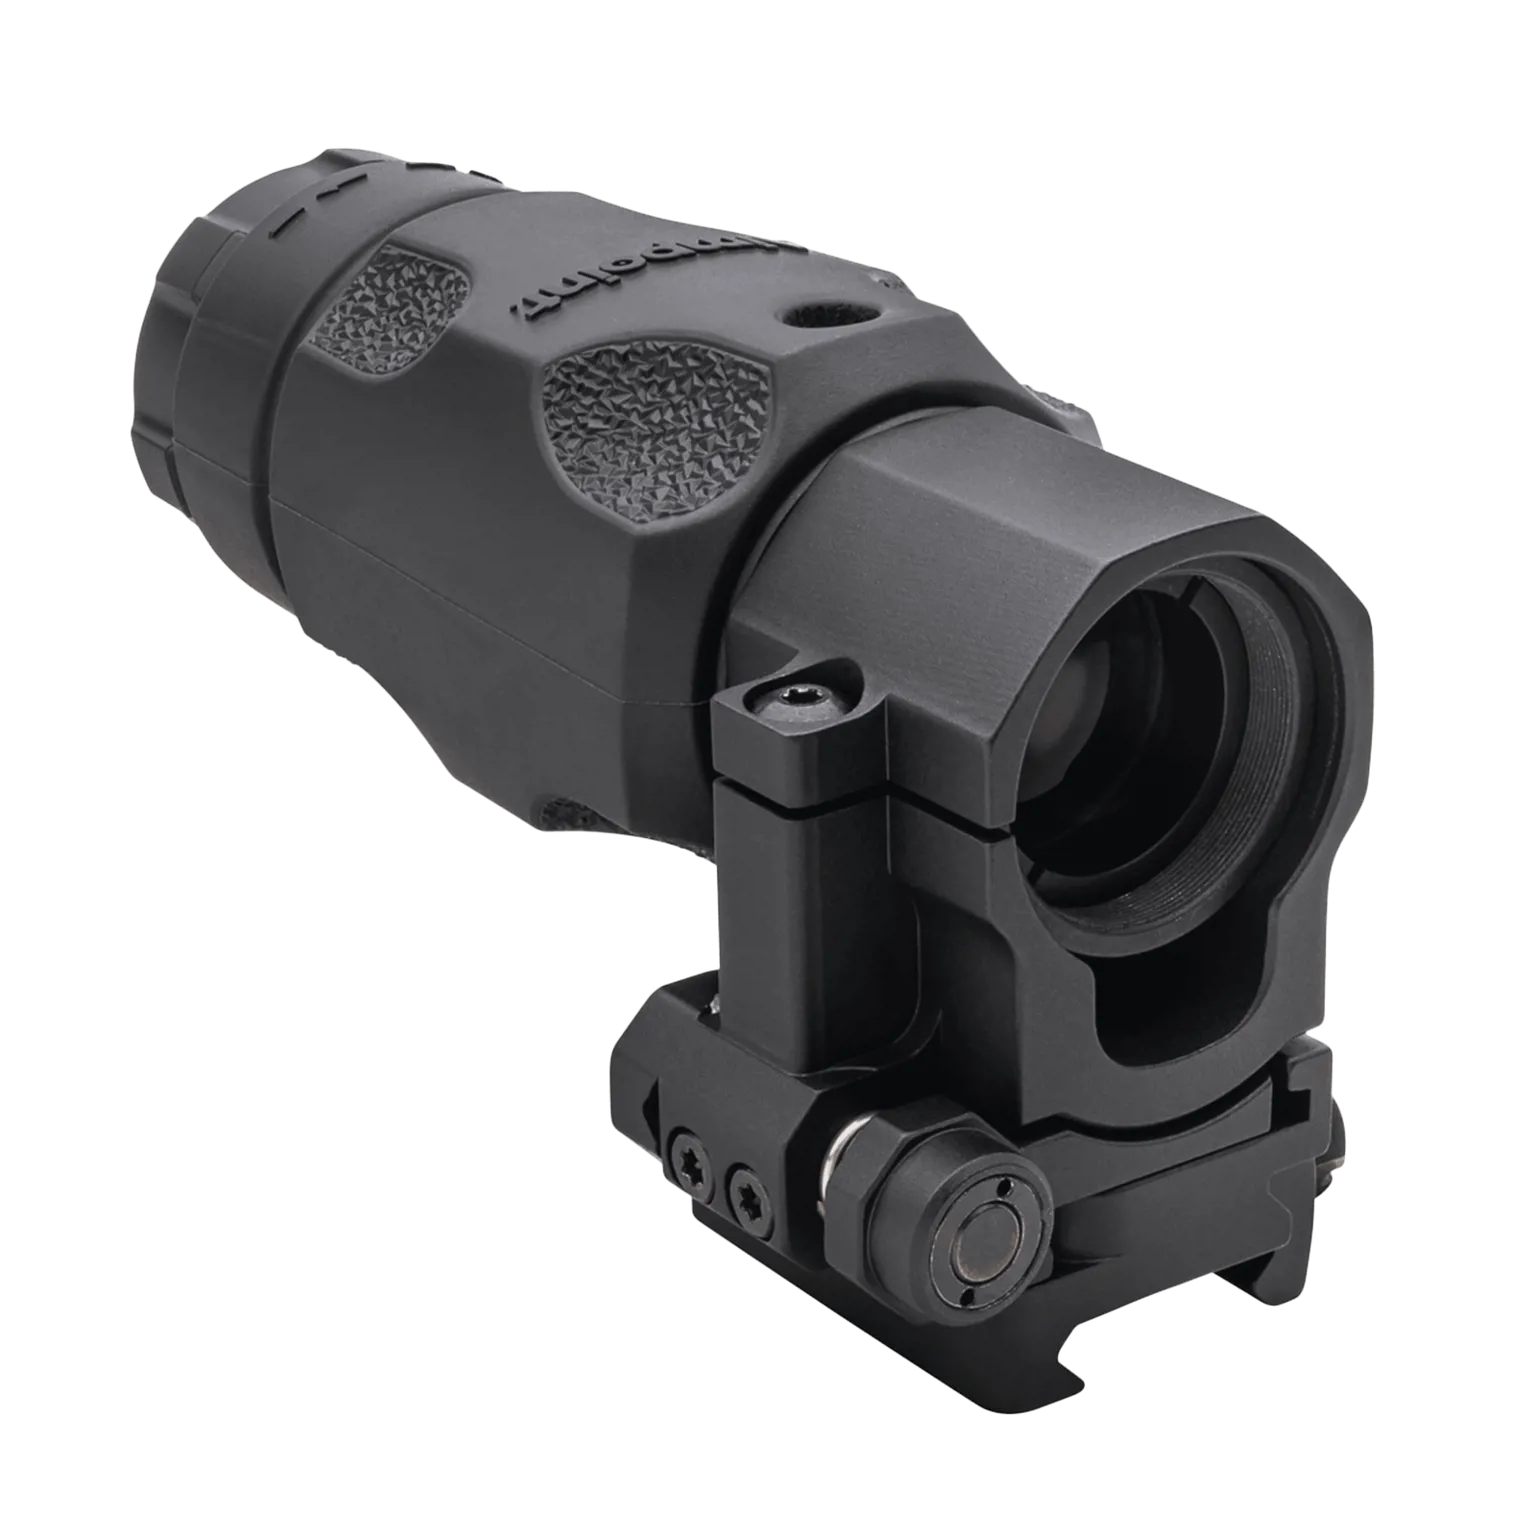 3XMag-1™ Magnifier with FlipMount™ 39 mm and TwistMount™ base  - 3